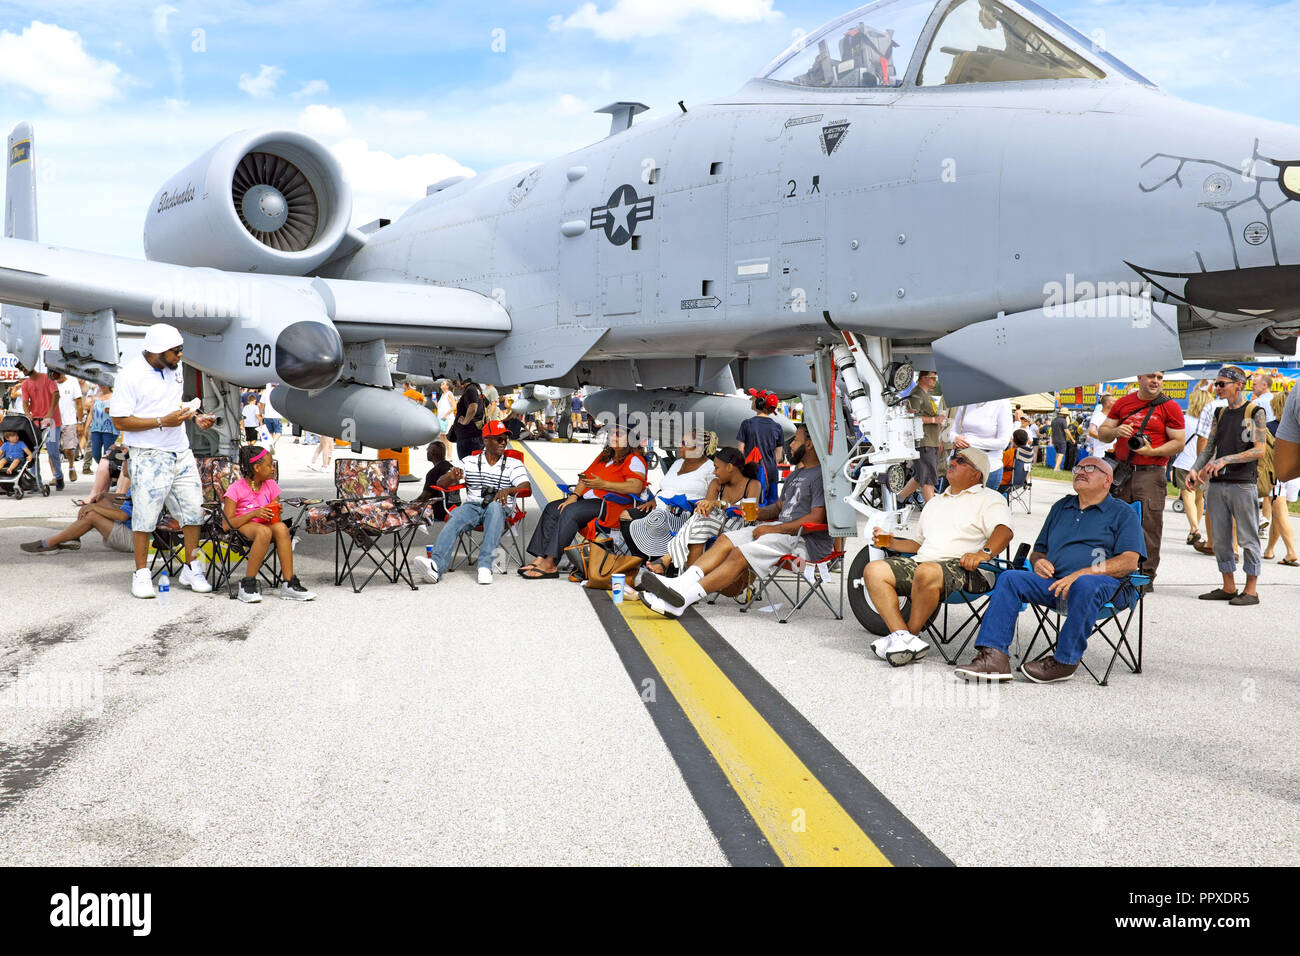 Guests at the 2018 Burke Lakefront annual Air Show on September 1, 2018, seek shade under one of the aircraft on display on Labor Day weekend. Stock Photo